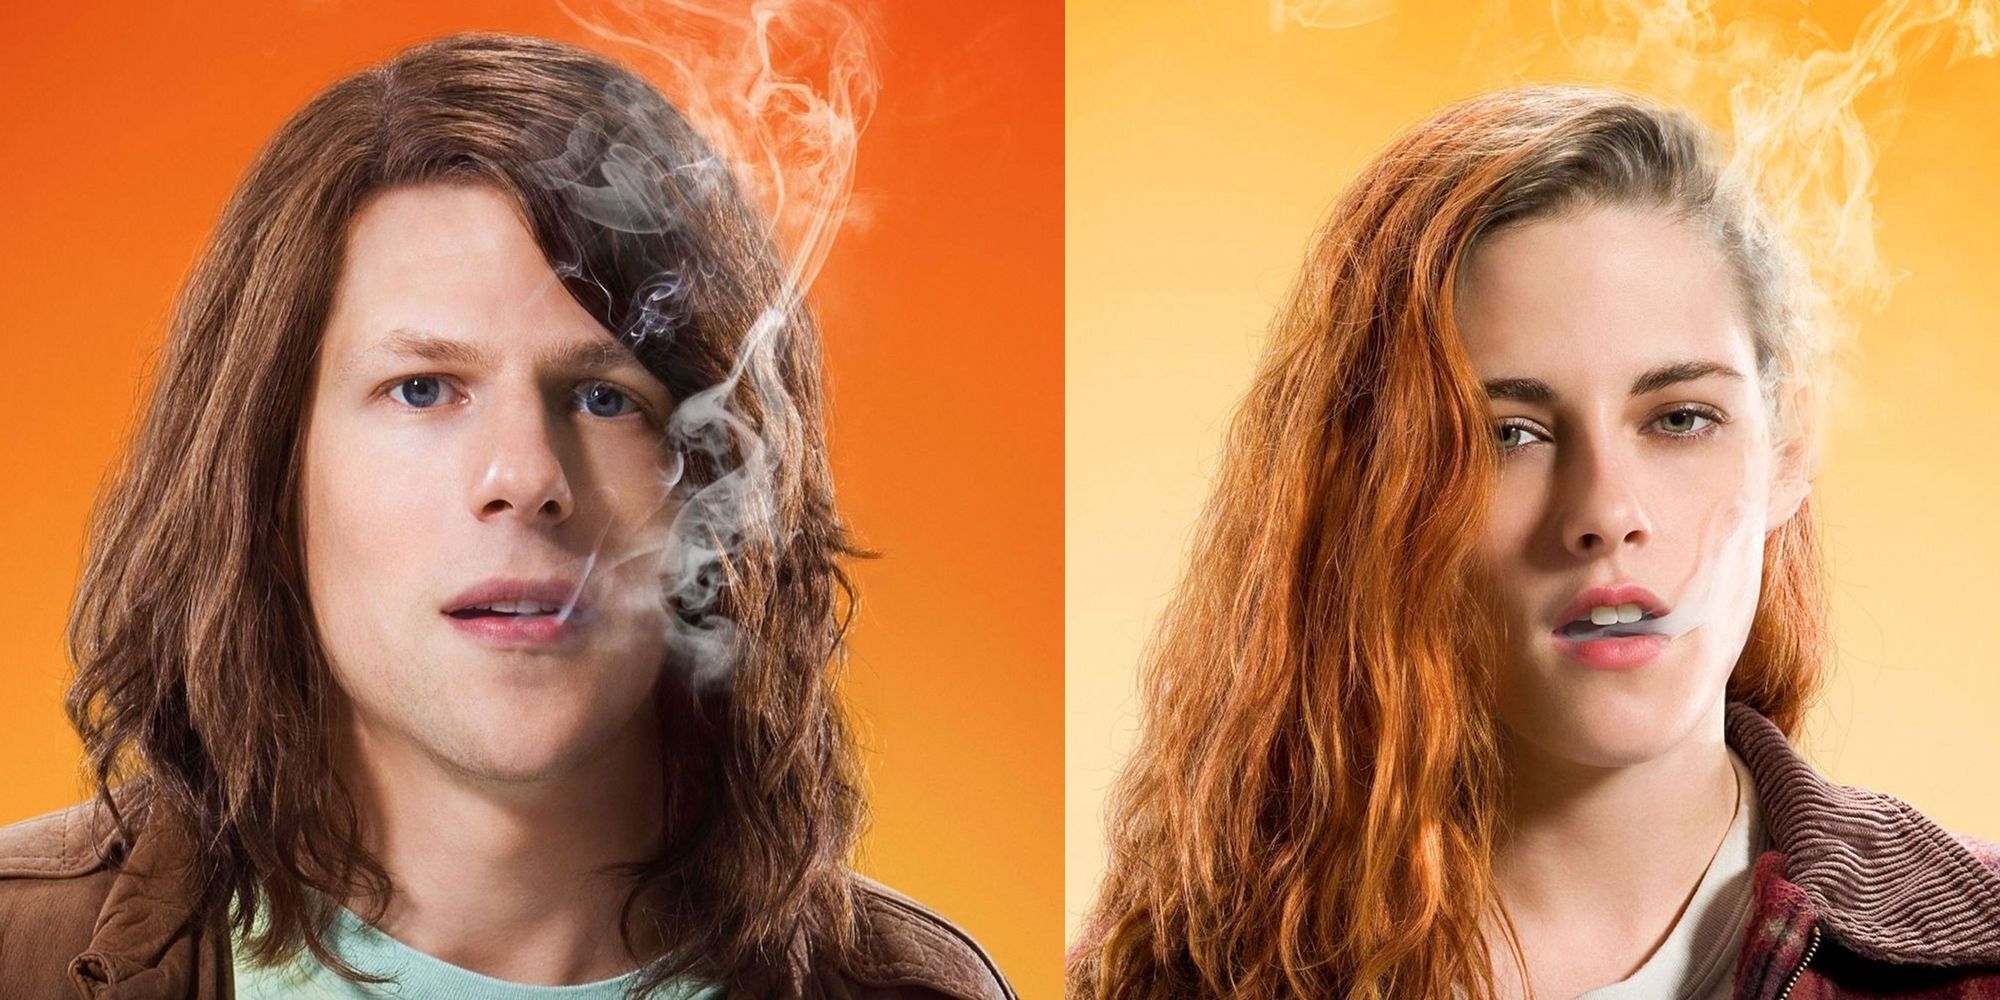 12 Most Chill Movie Stoners